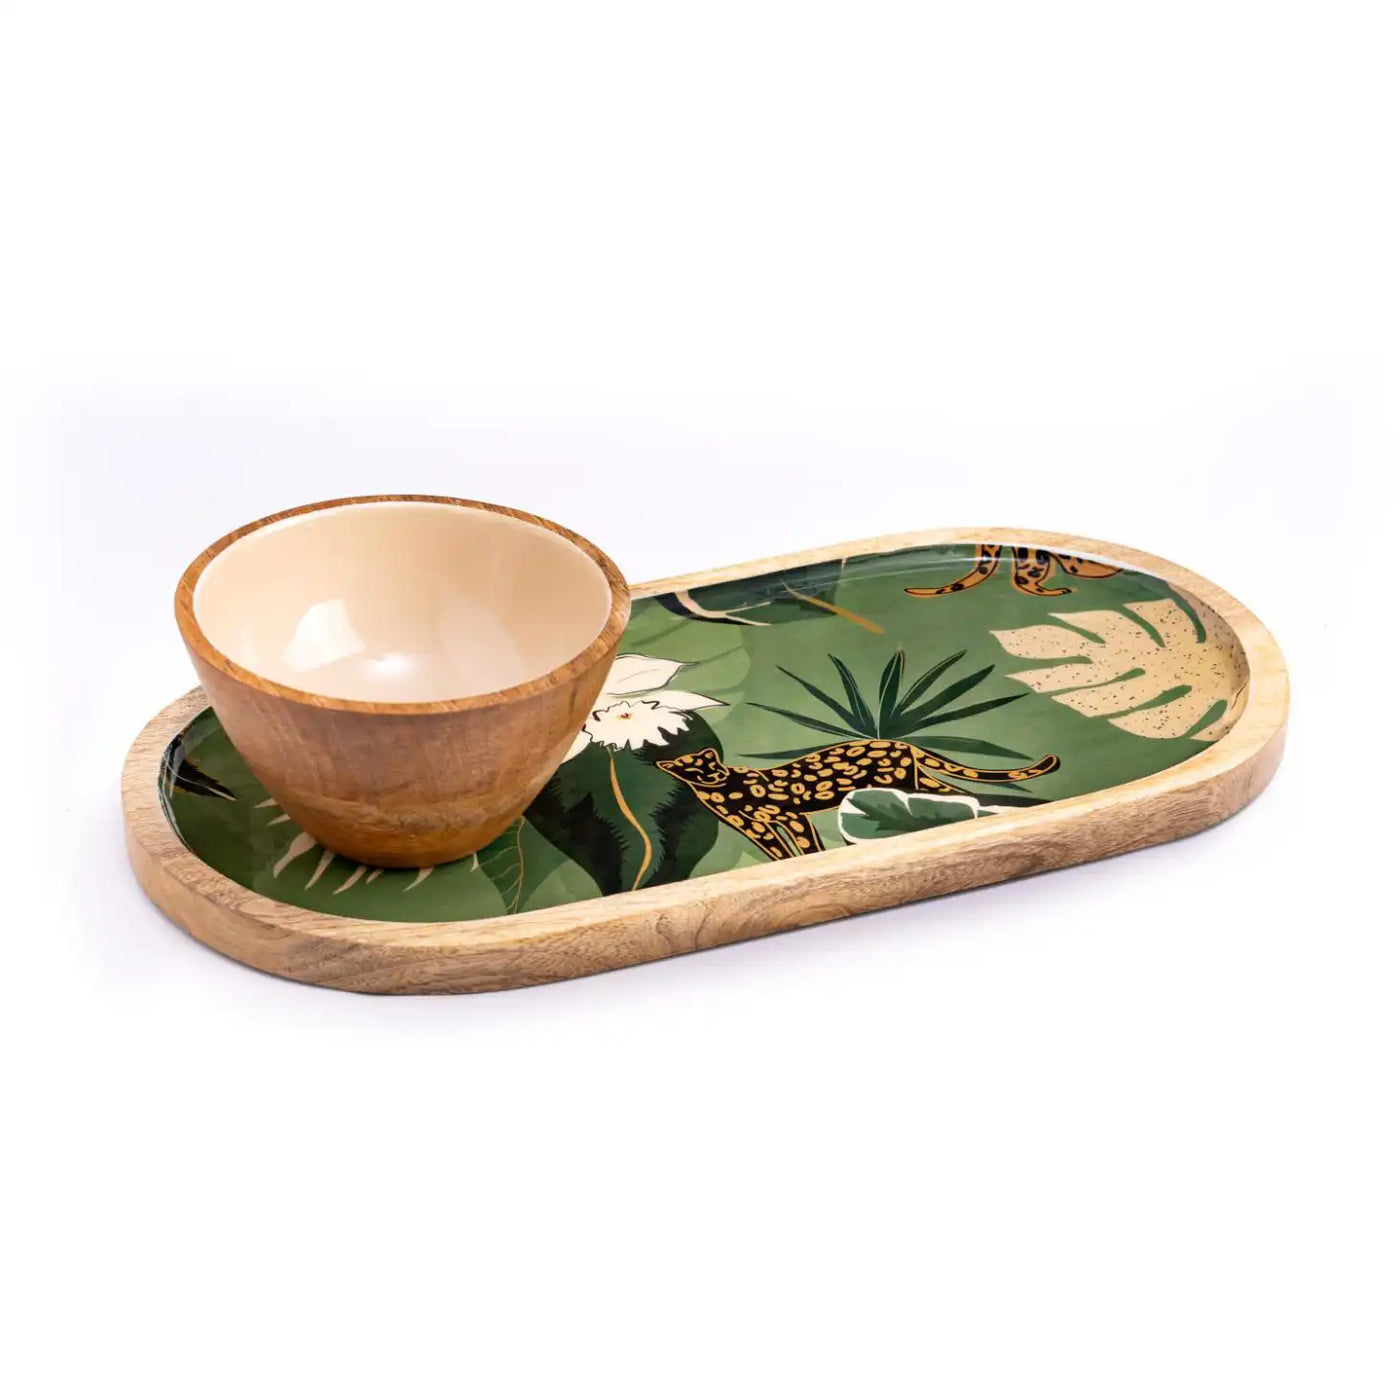 Wooden Platter - Jungle Green with Bowl